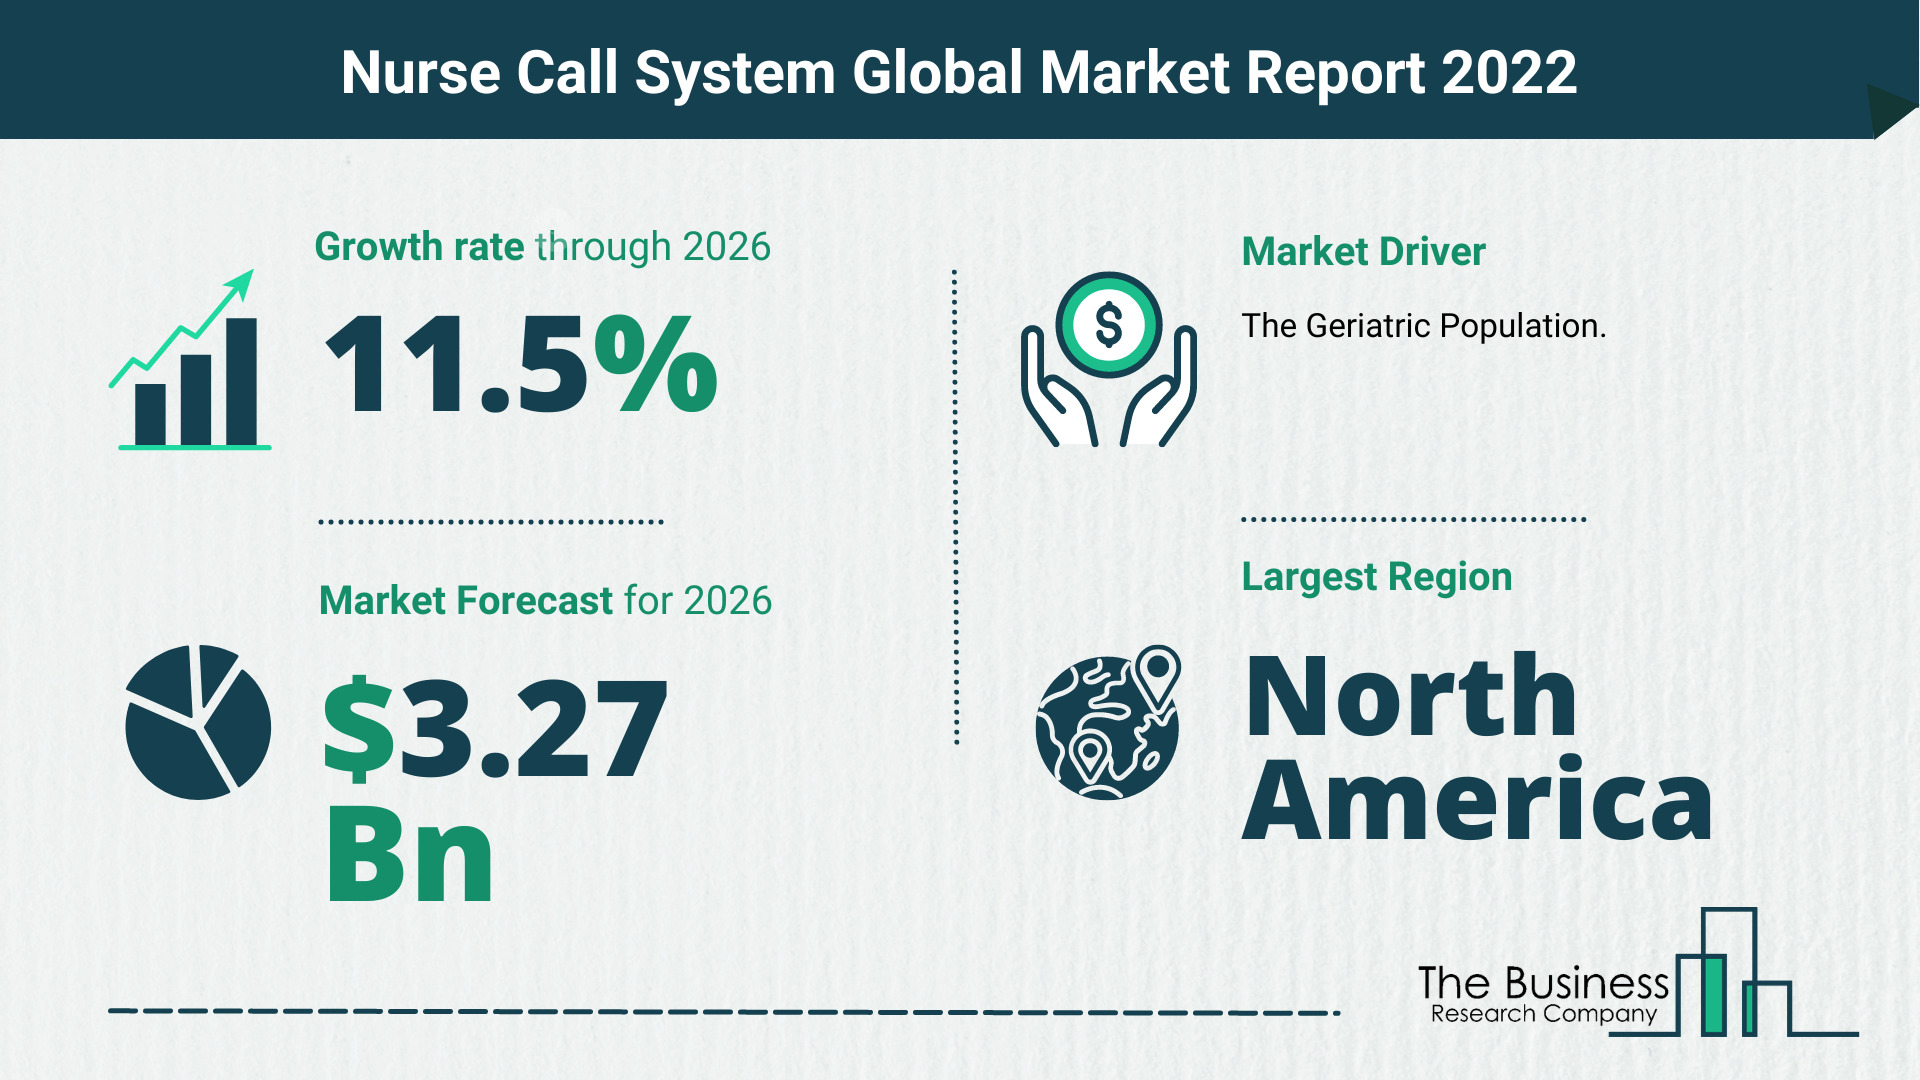 What Is The Nurse Call System Market Overview In 2022?